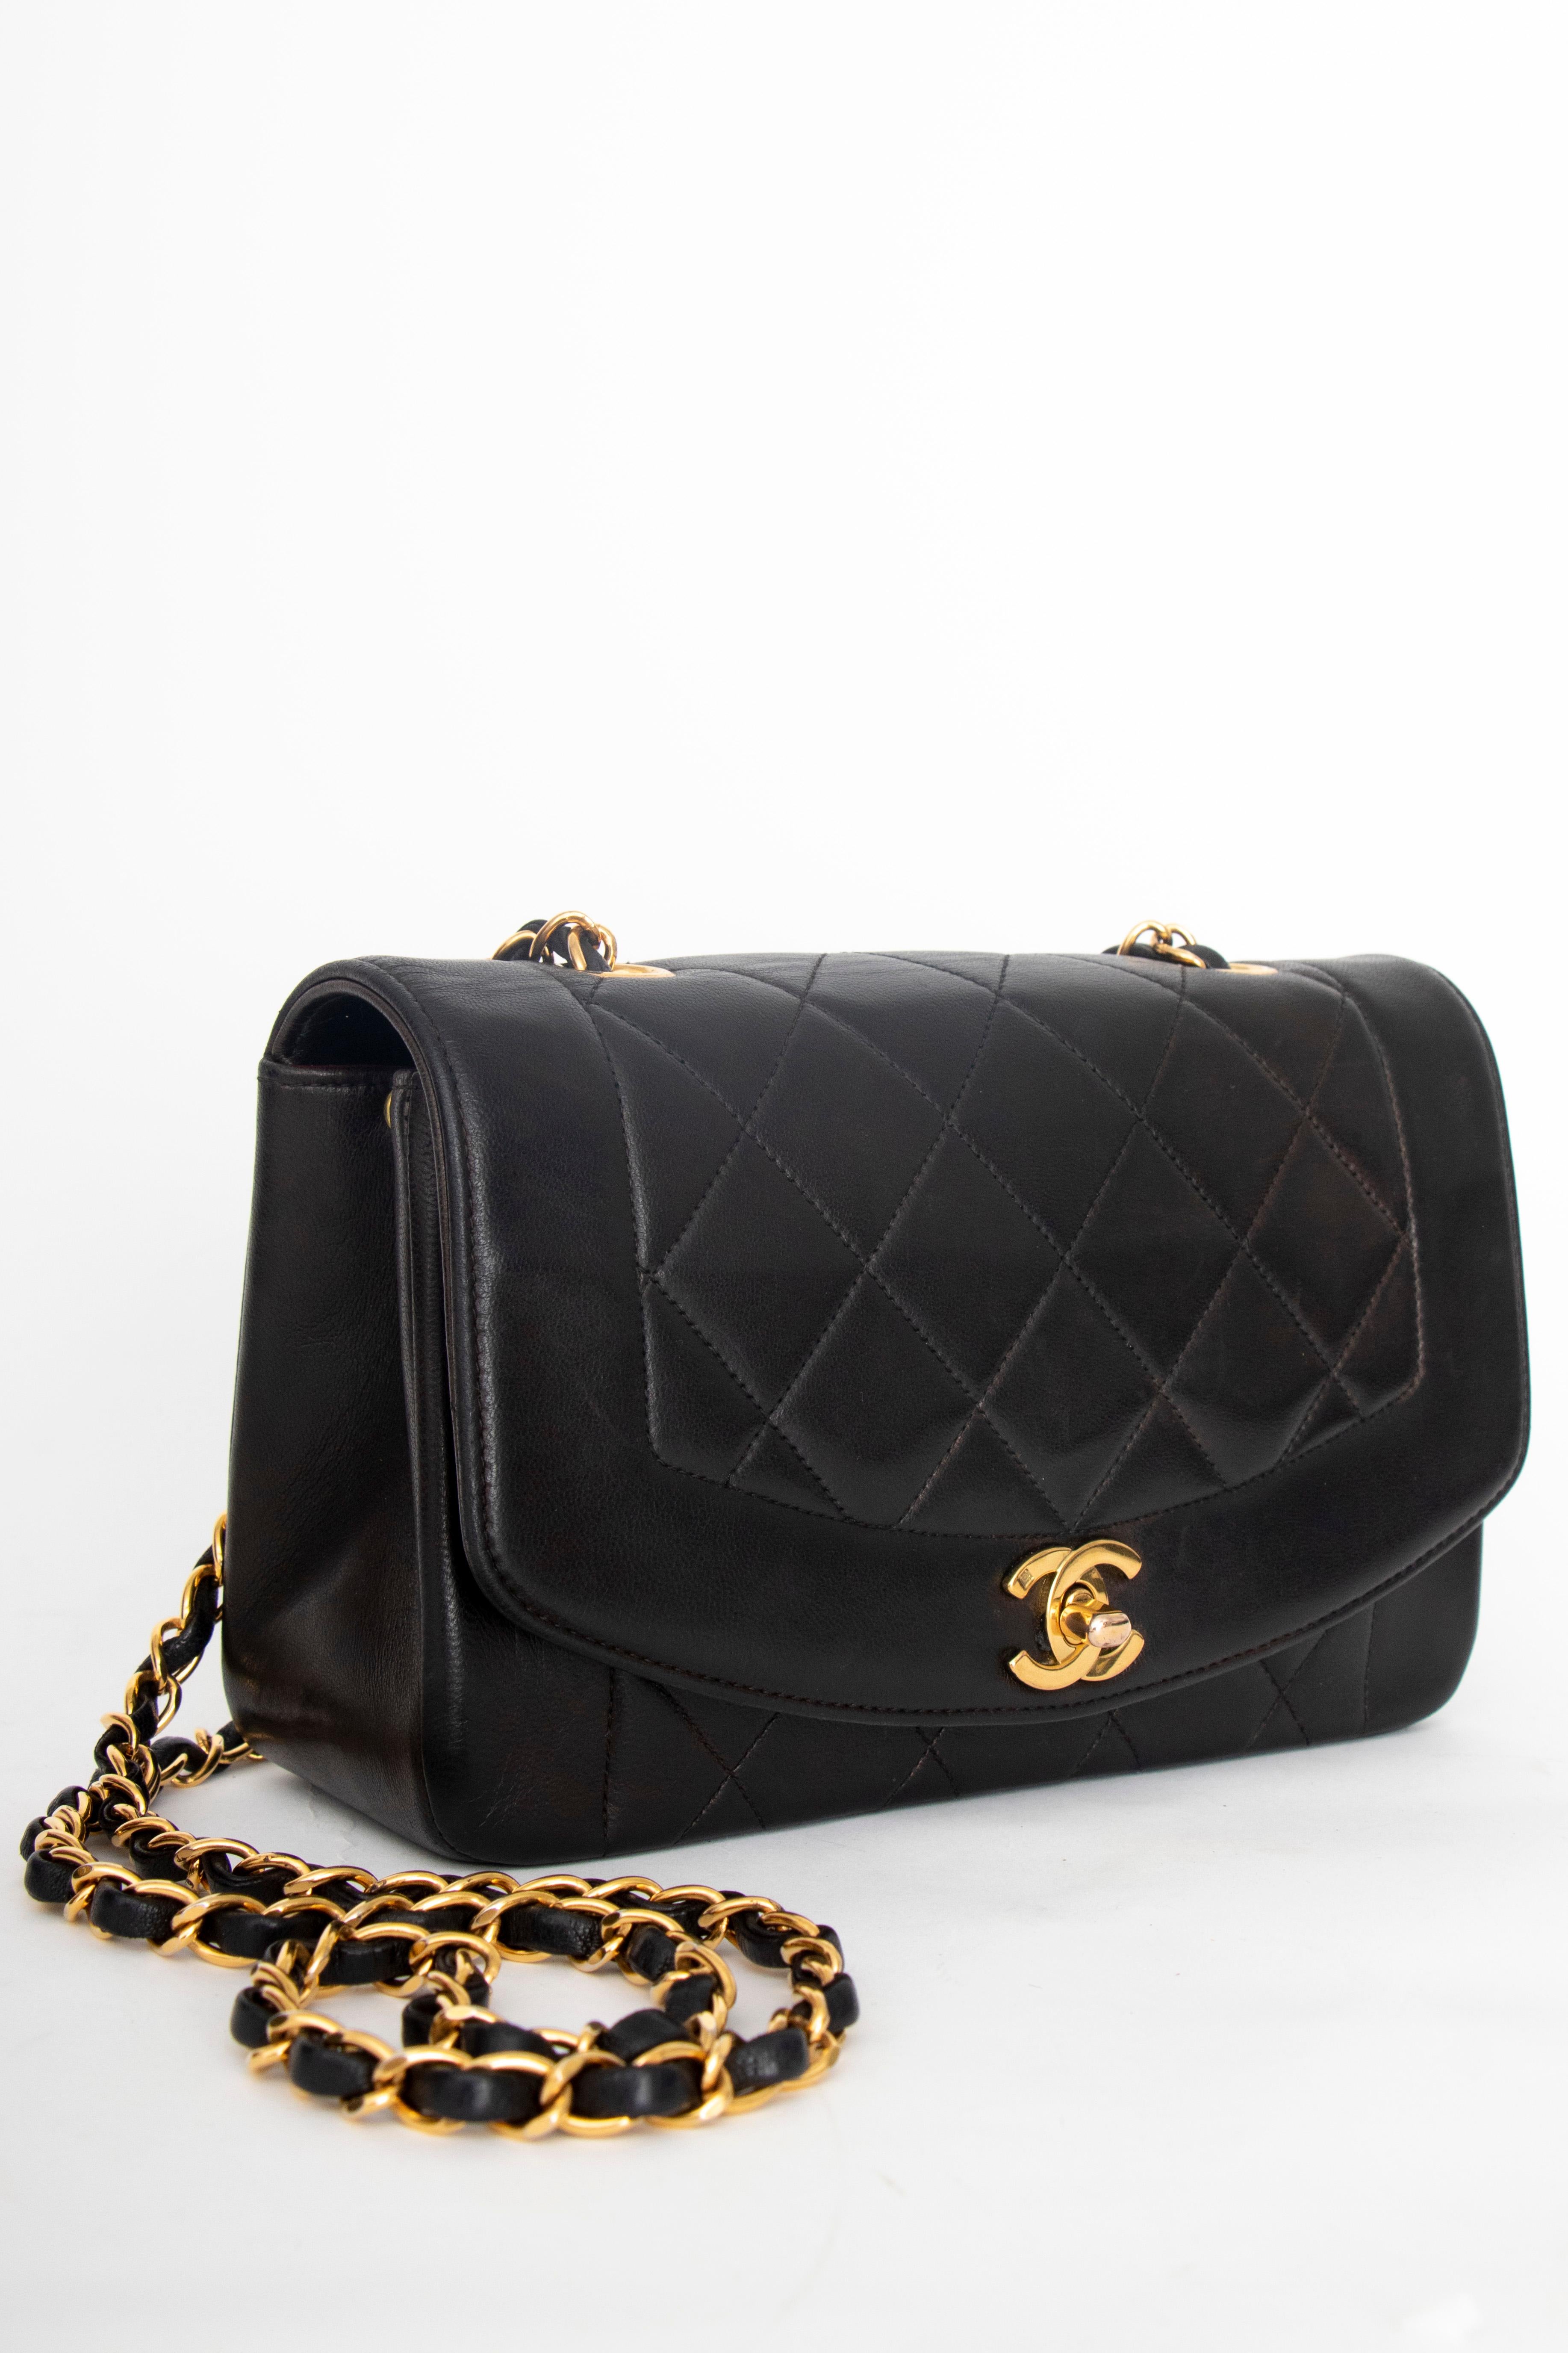 Women's or Men's A 1990s Chanel Black Quilted Lambskin Bag Gold Hardware 